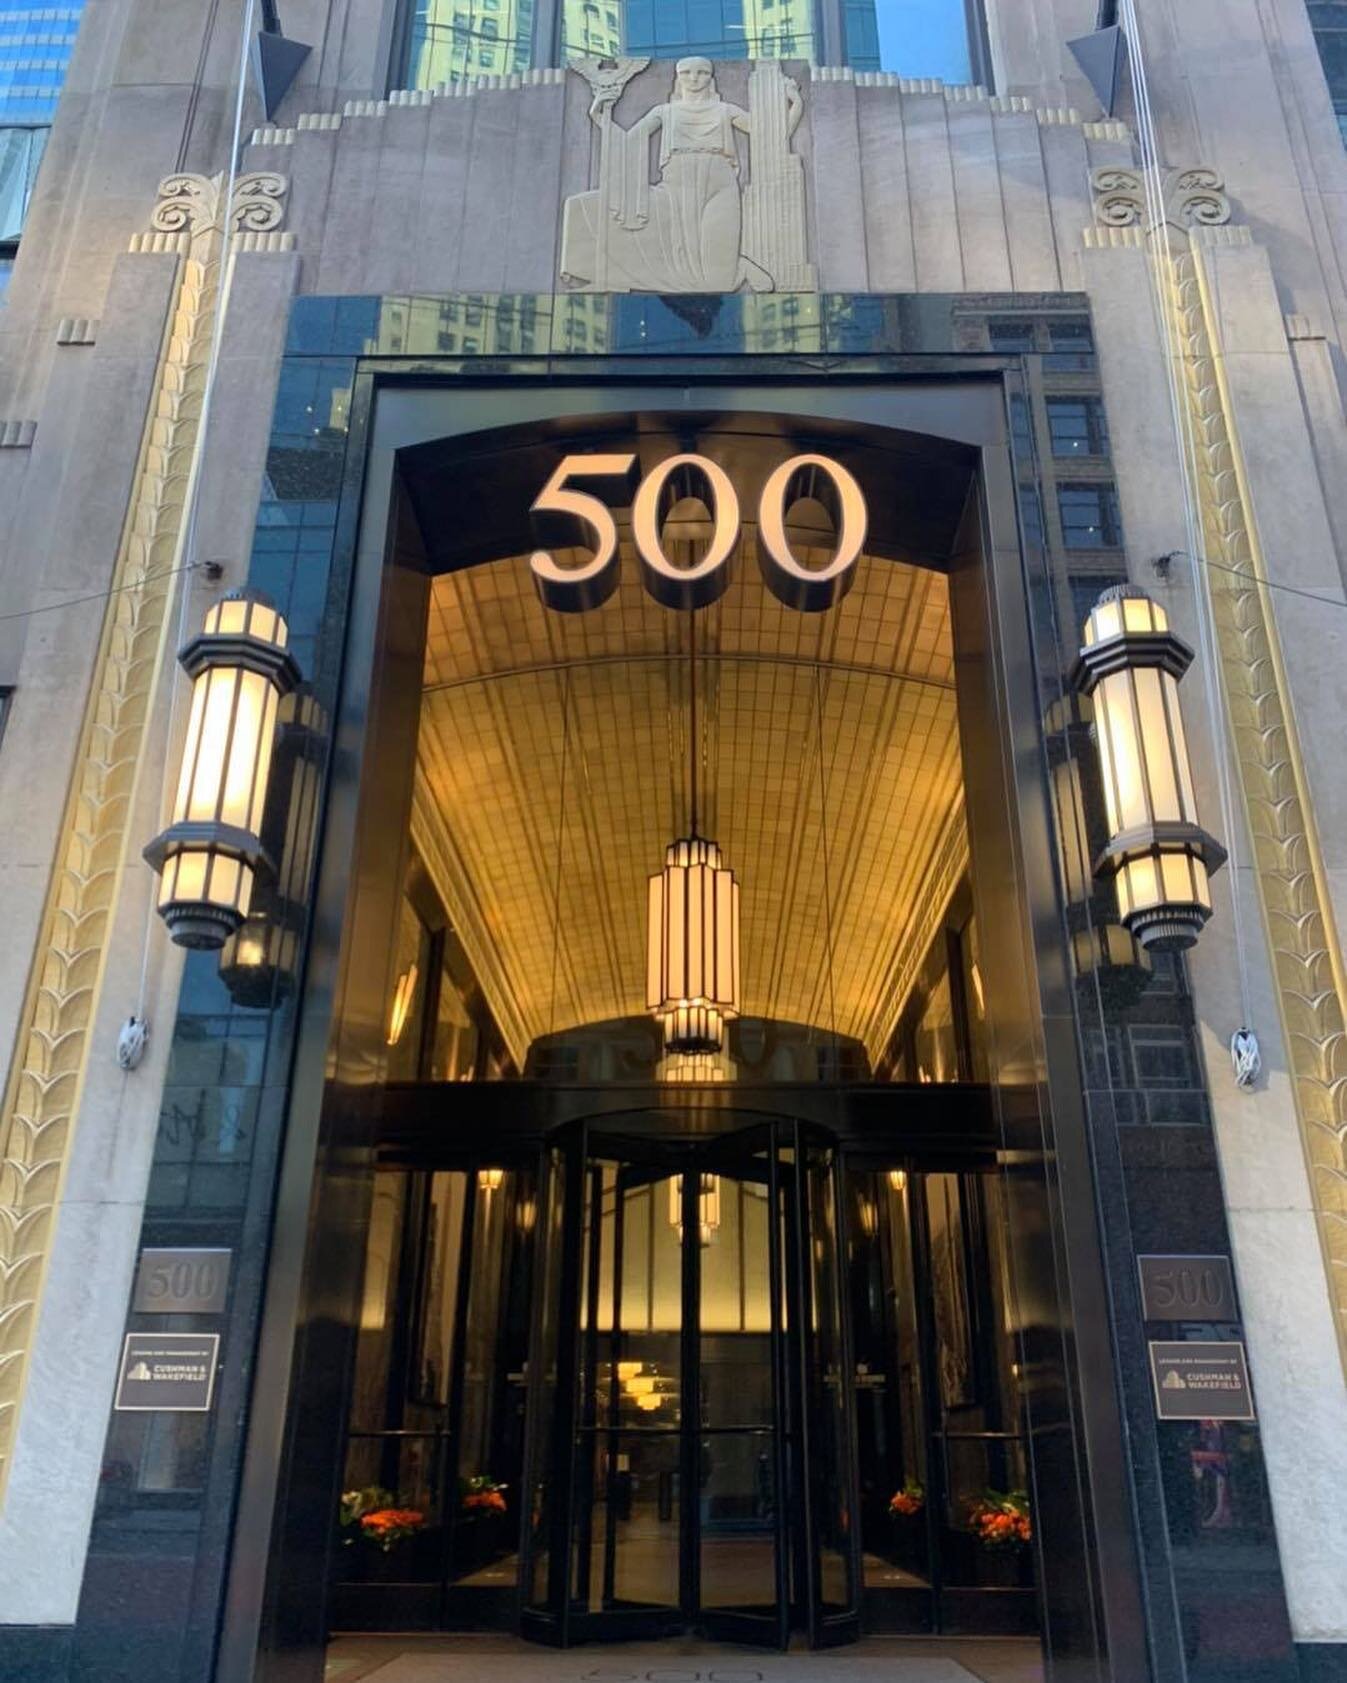 On our Art Deco &amp; Landmarks of Midtown Tour, we visit numerous historic buildings, particularly focusing on how Art Deco architecture came to define the skyscraper age in pre-war New York.

The tour is available several mornings each week&hellip;